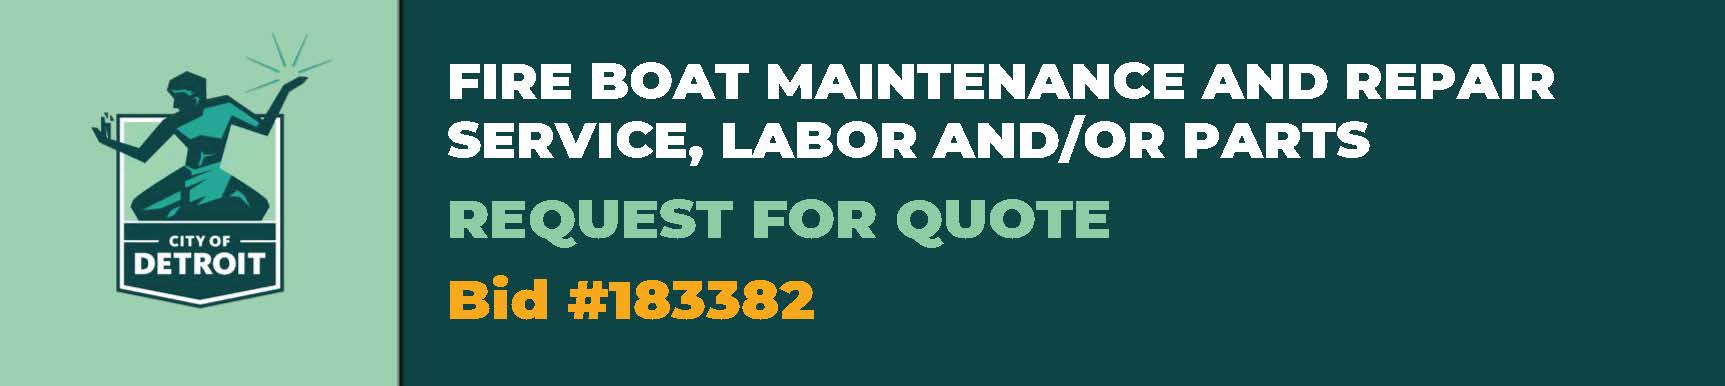 FIRE BOAT MAINTENANCE AND REPAIR SERVICE, LABOR AND/OR PARTS